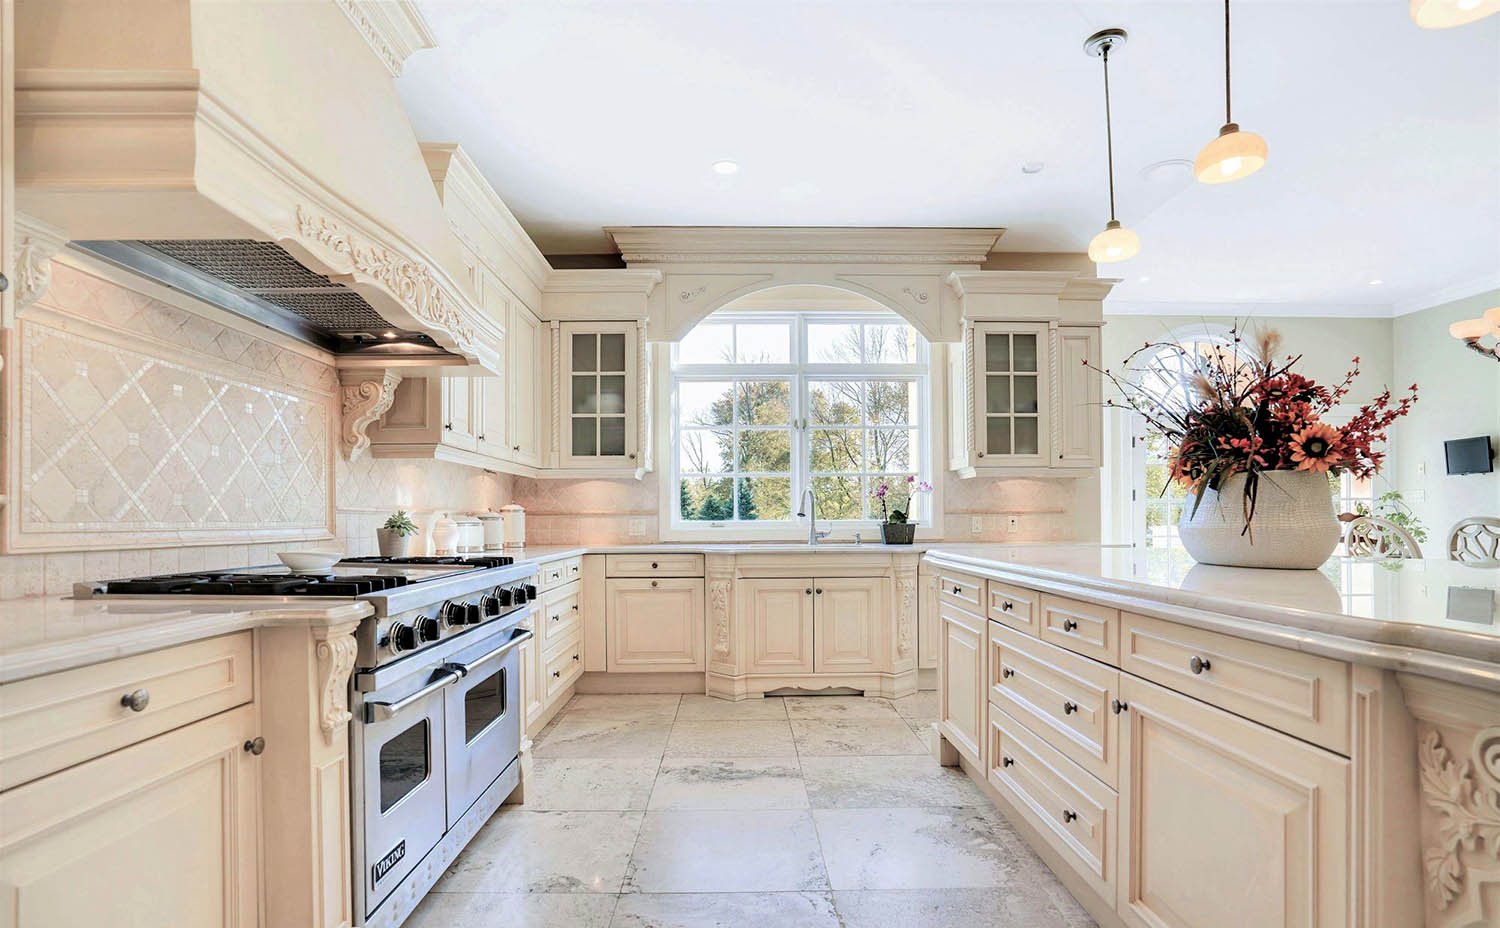 Fantastic luxury kitchen featuring cream colored cabinets and matching stone floors and backsplash. Marble countertops with veins of warm gray.